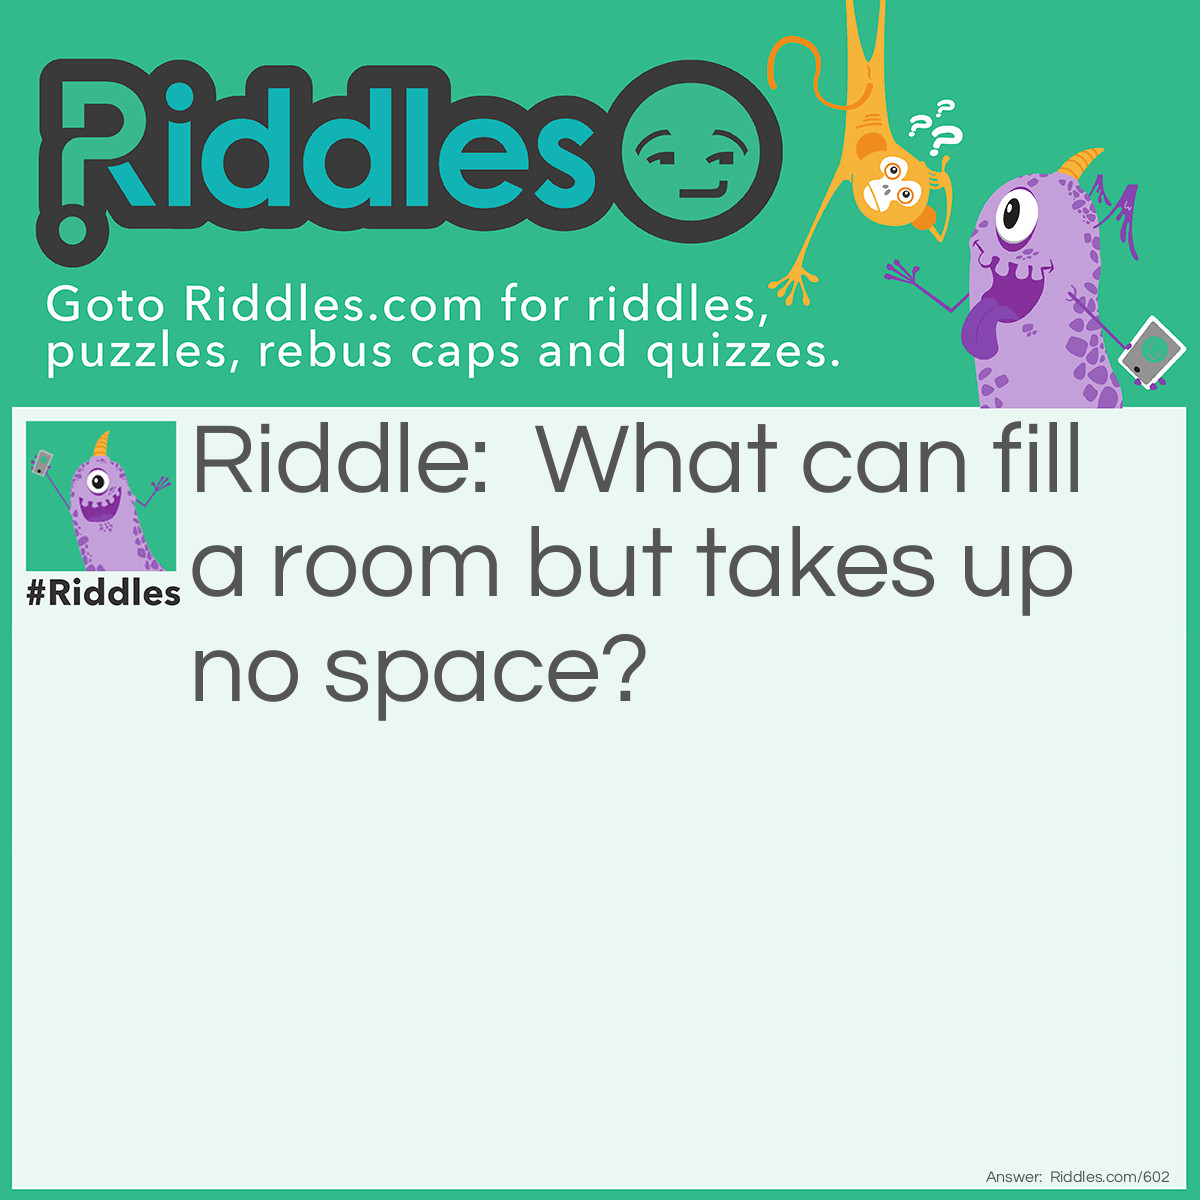 Riddle: What can fill a room but takes up no space? Answer: Light.